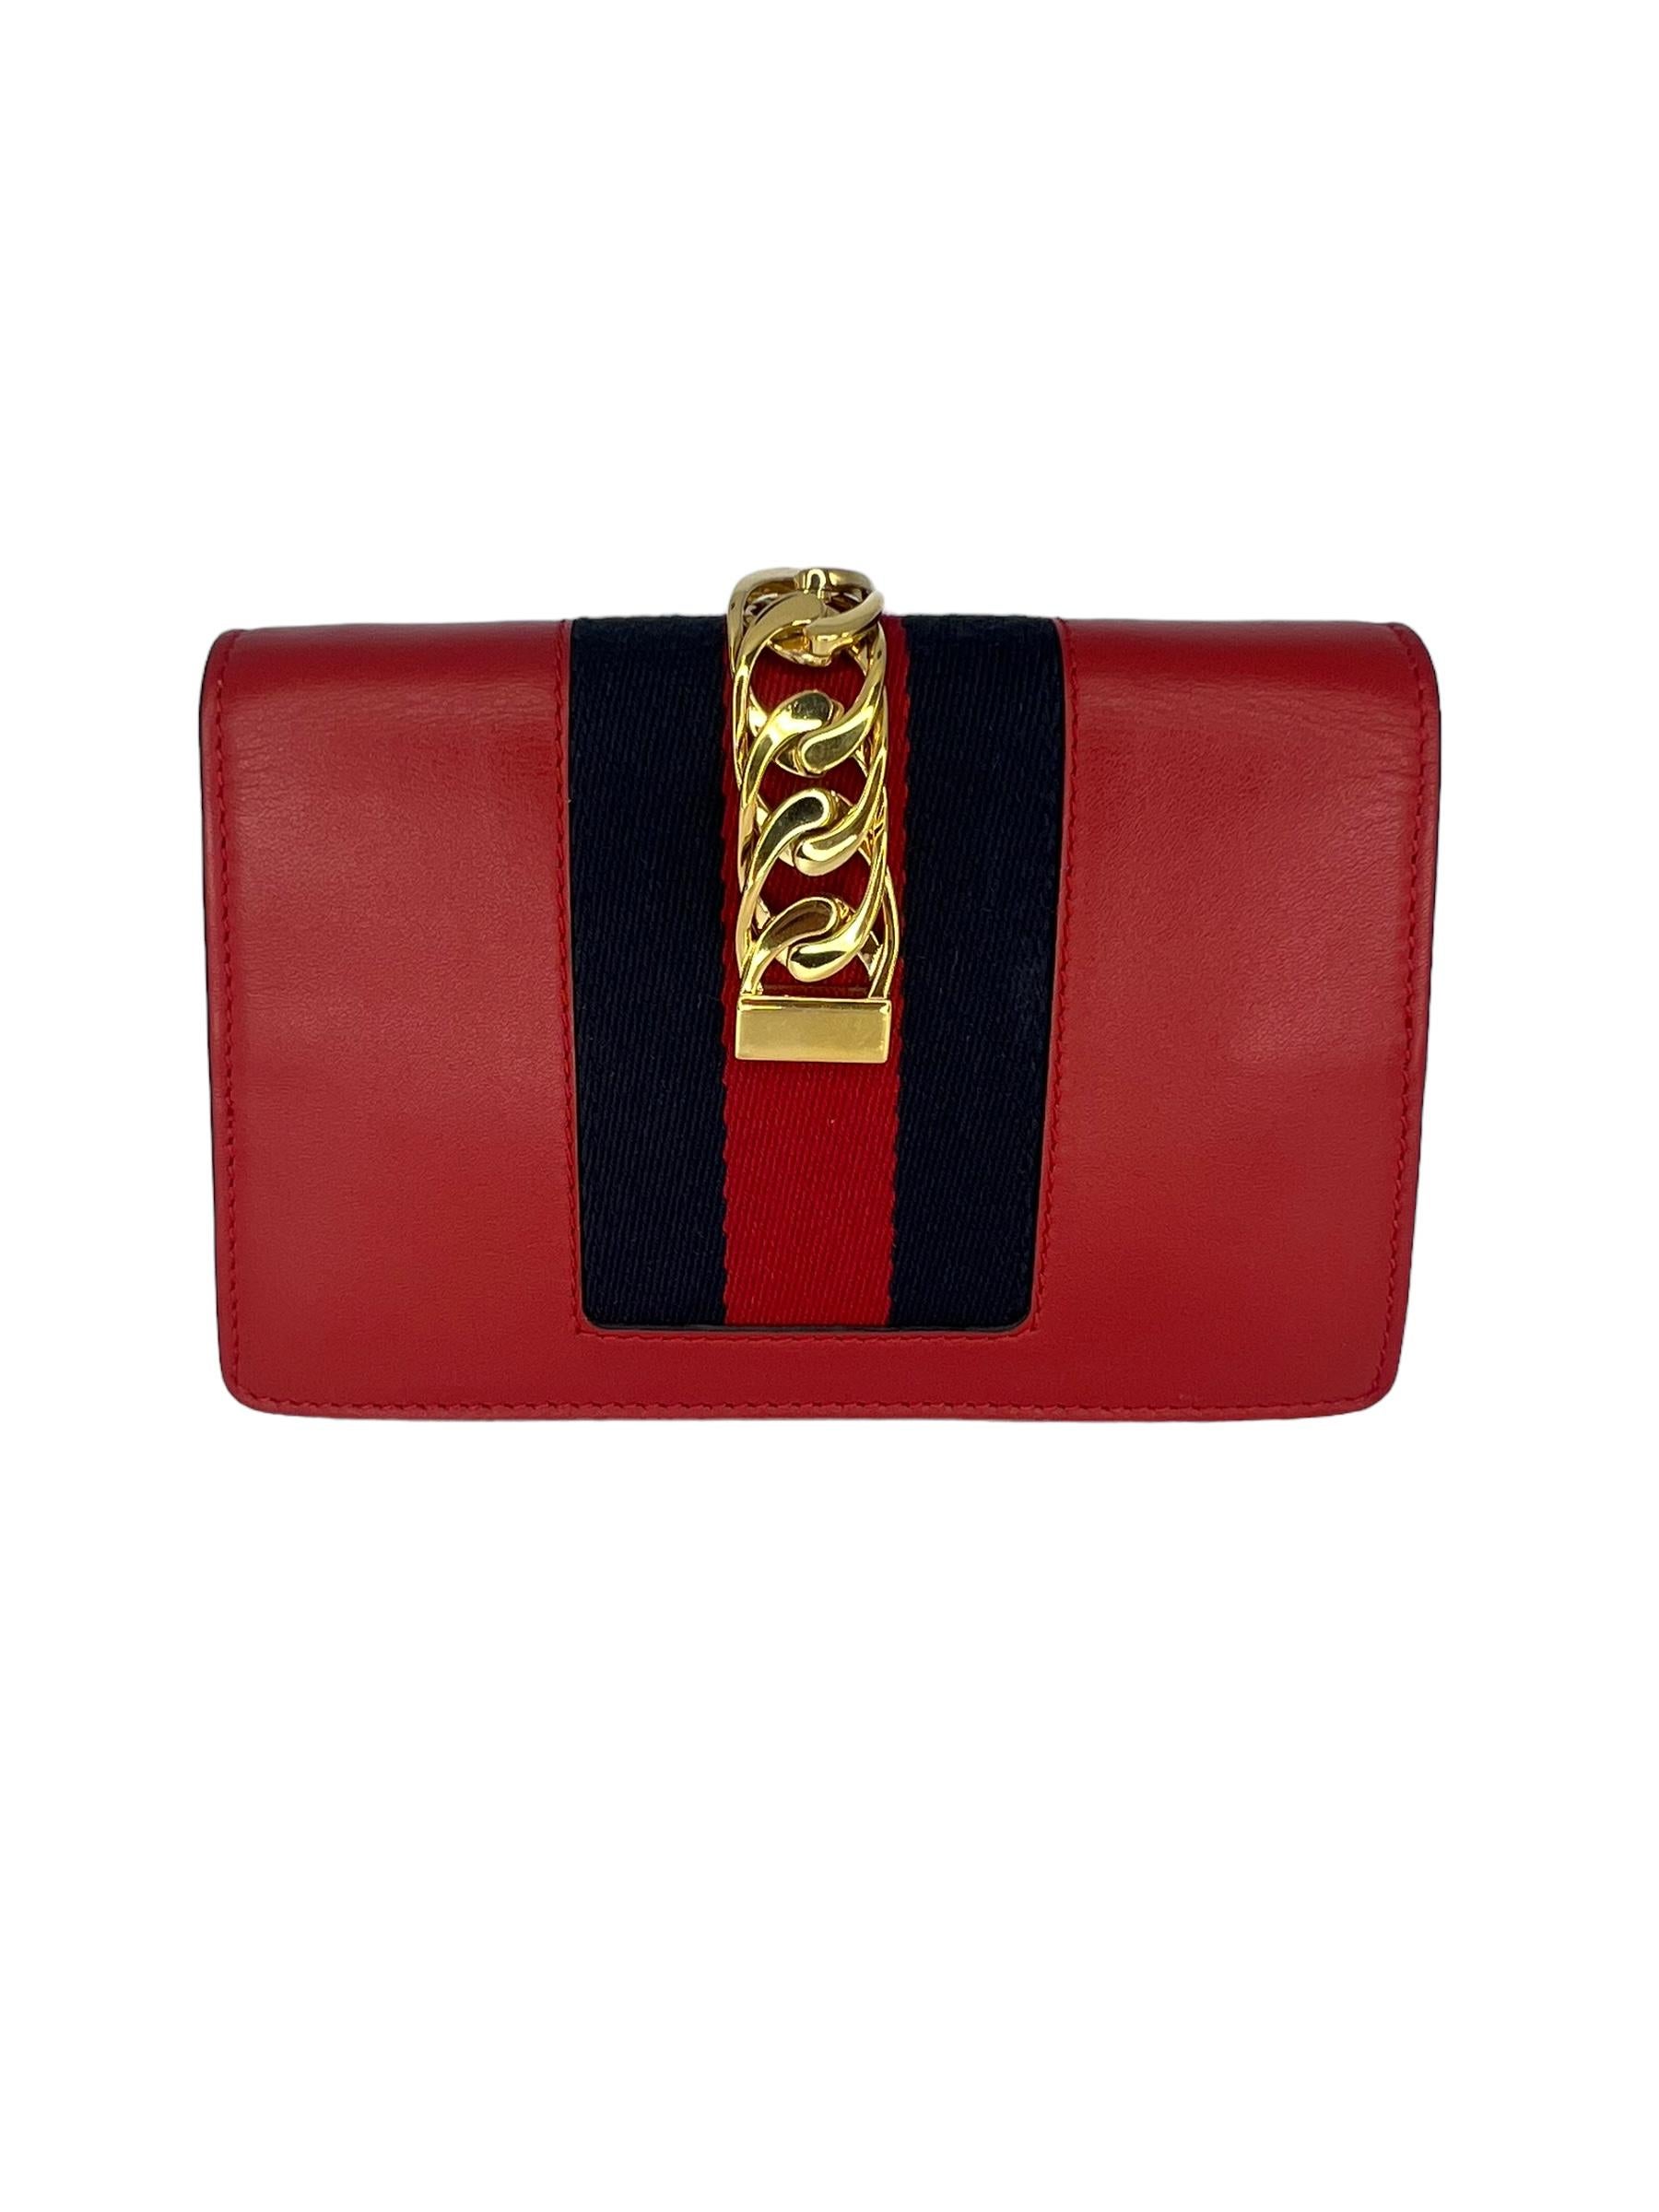 GUCCI Calfskin Mini Sylvie Chain Shoulder Bag in Hibiscus Red. This chic structured shoulder bag is crafted of smooth calfskin leather in red and features a gold chain strap, prominent front flap detailed with a central red and navy blue web stripe